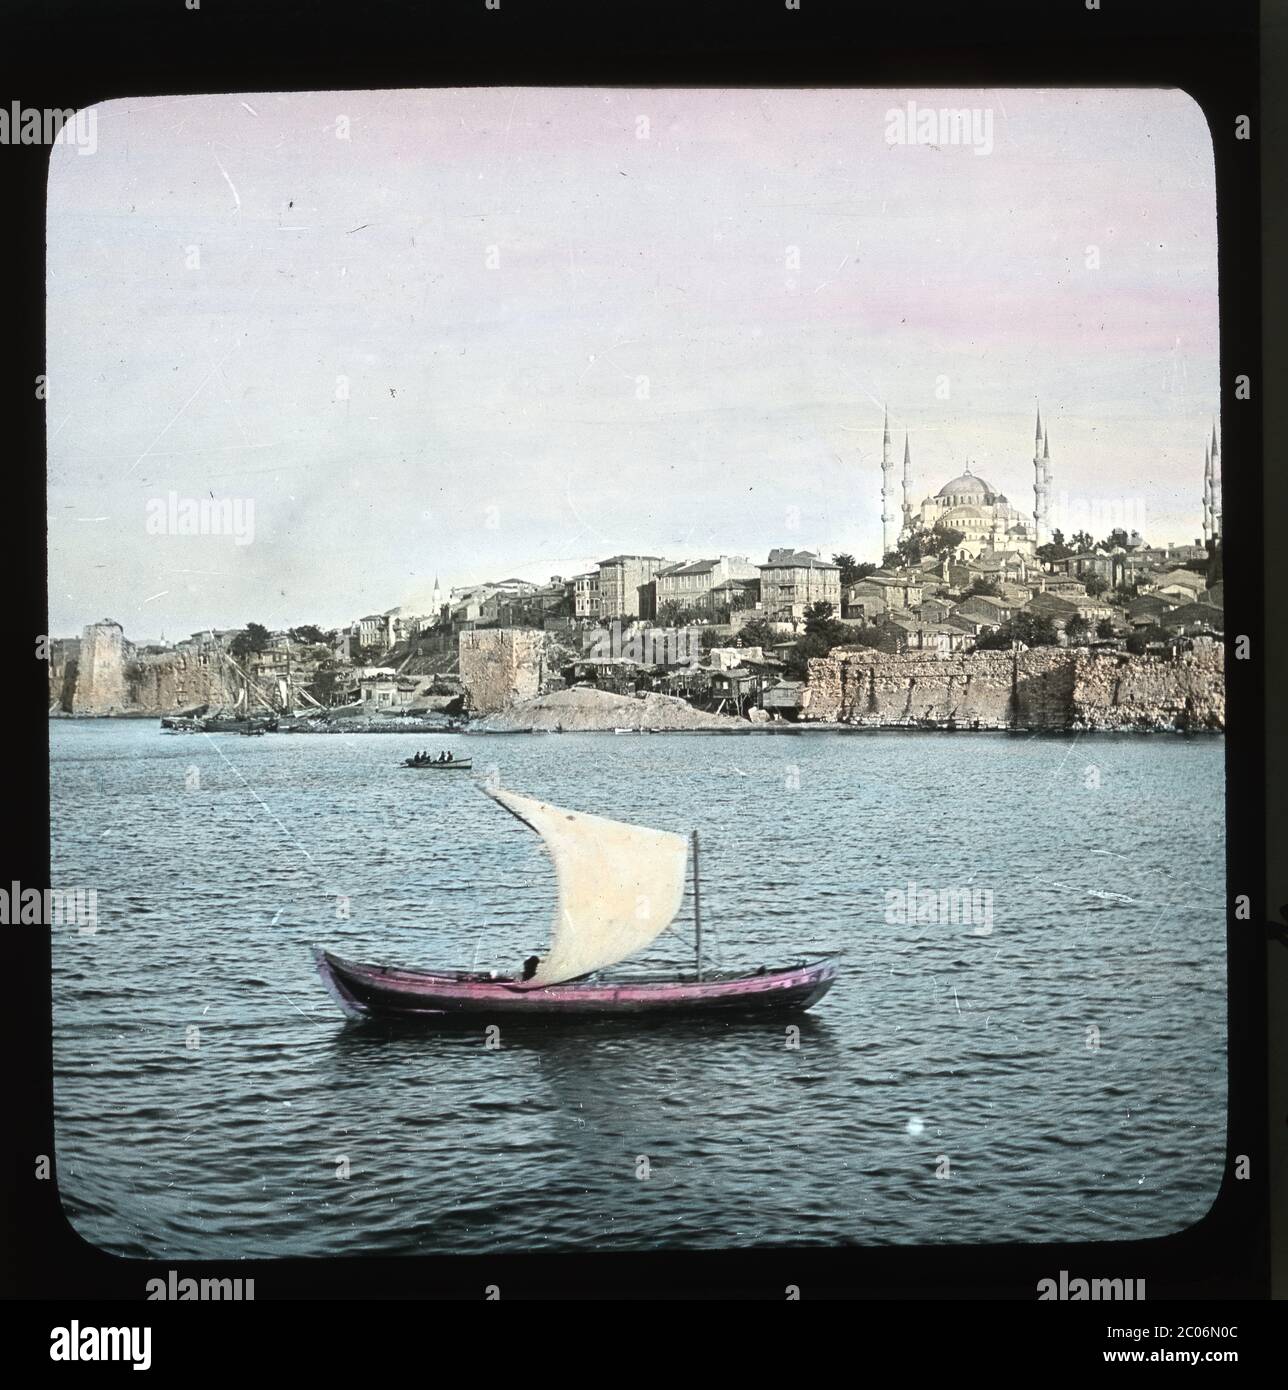 Seaside walls and city skyline with Hagia Sophia from the Marmara sea, Istanbul, Turkey. Hand colored slide from around 1910. Photograph on dry glass plate from the Herry W. Schaefer collection. Stock Photo